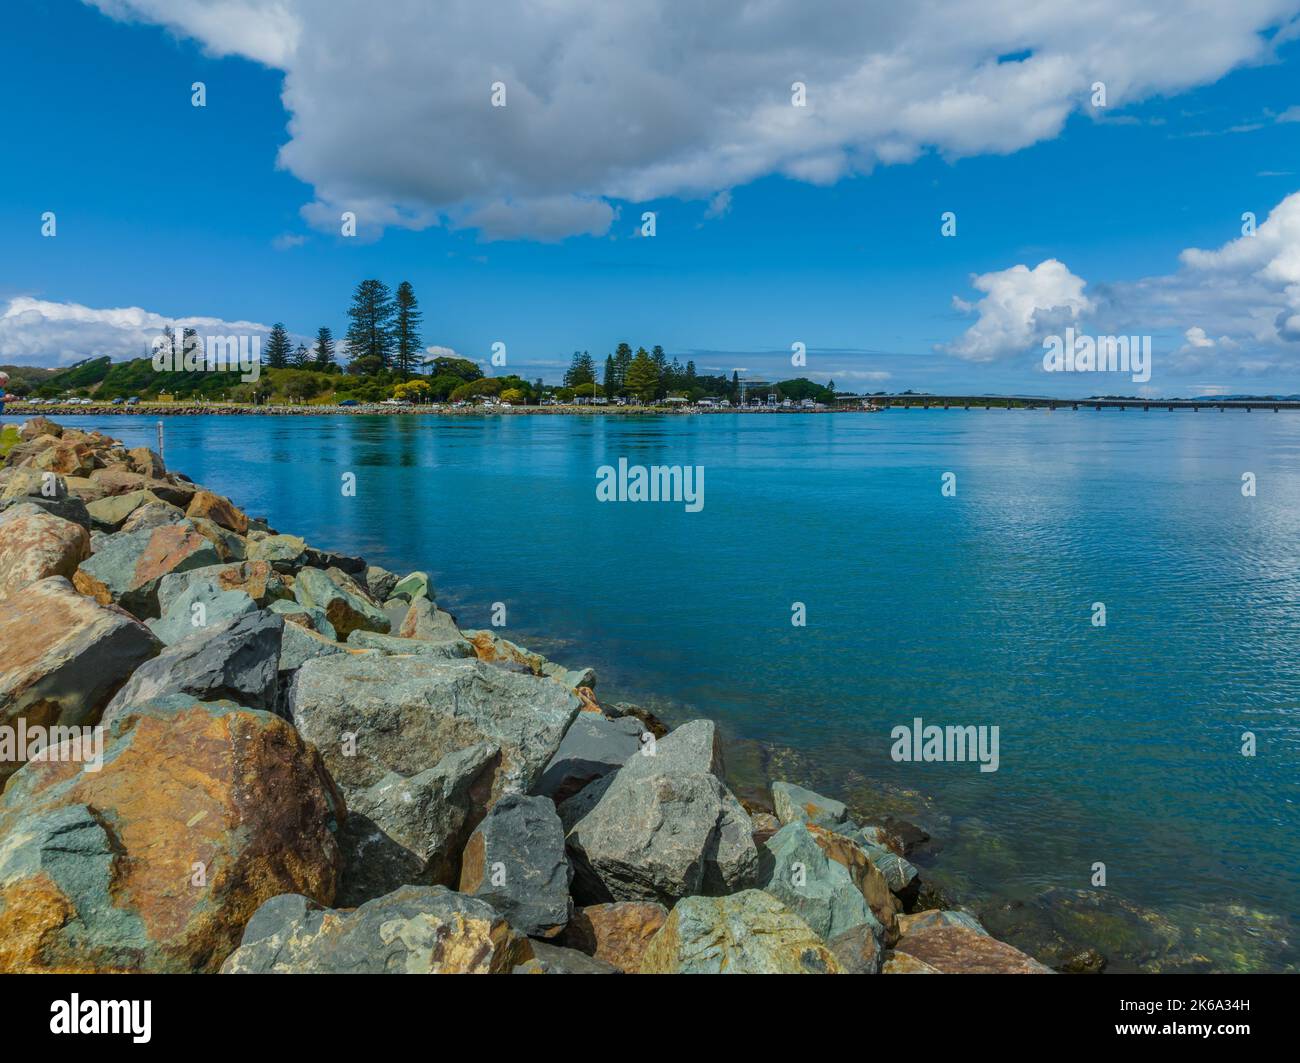 The Coolongolook River at Forster-Tuncurry with cumulus clouds in the sky on the Barrington Coast, NSW, Australia Stock Photo